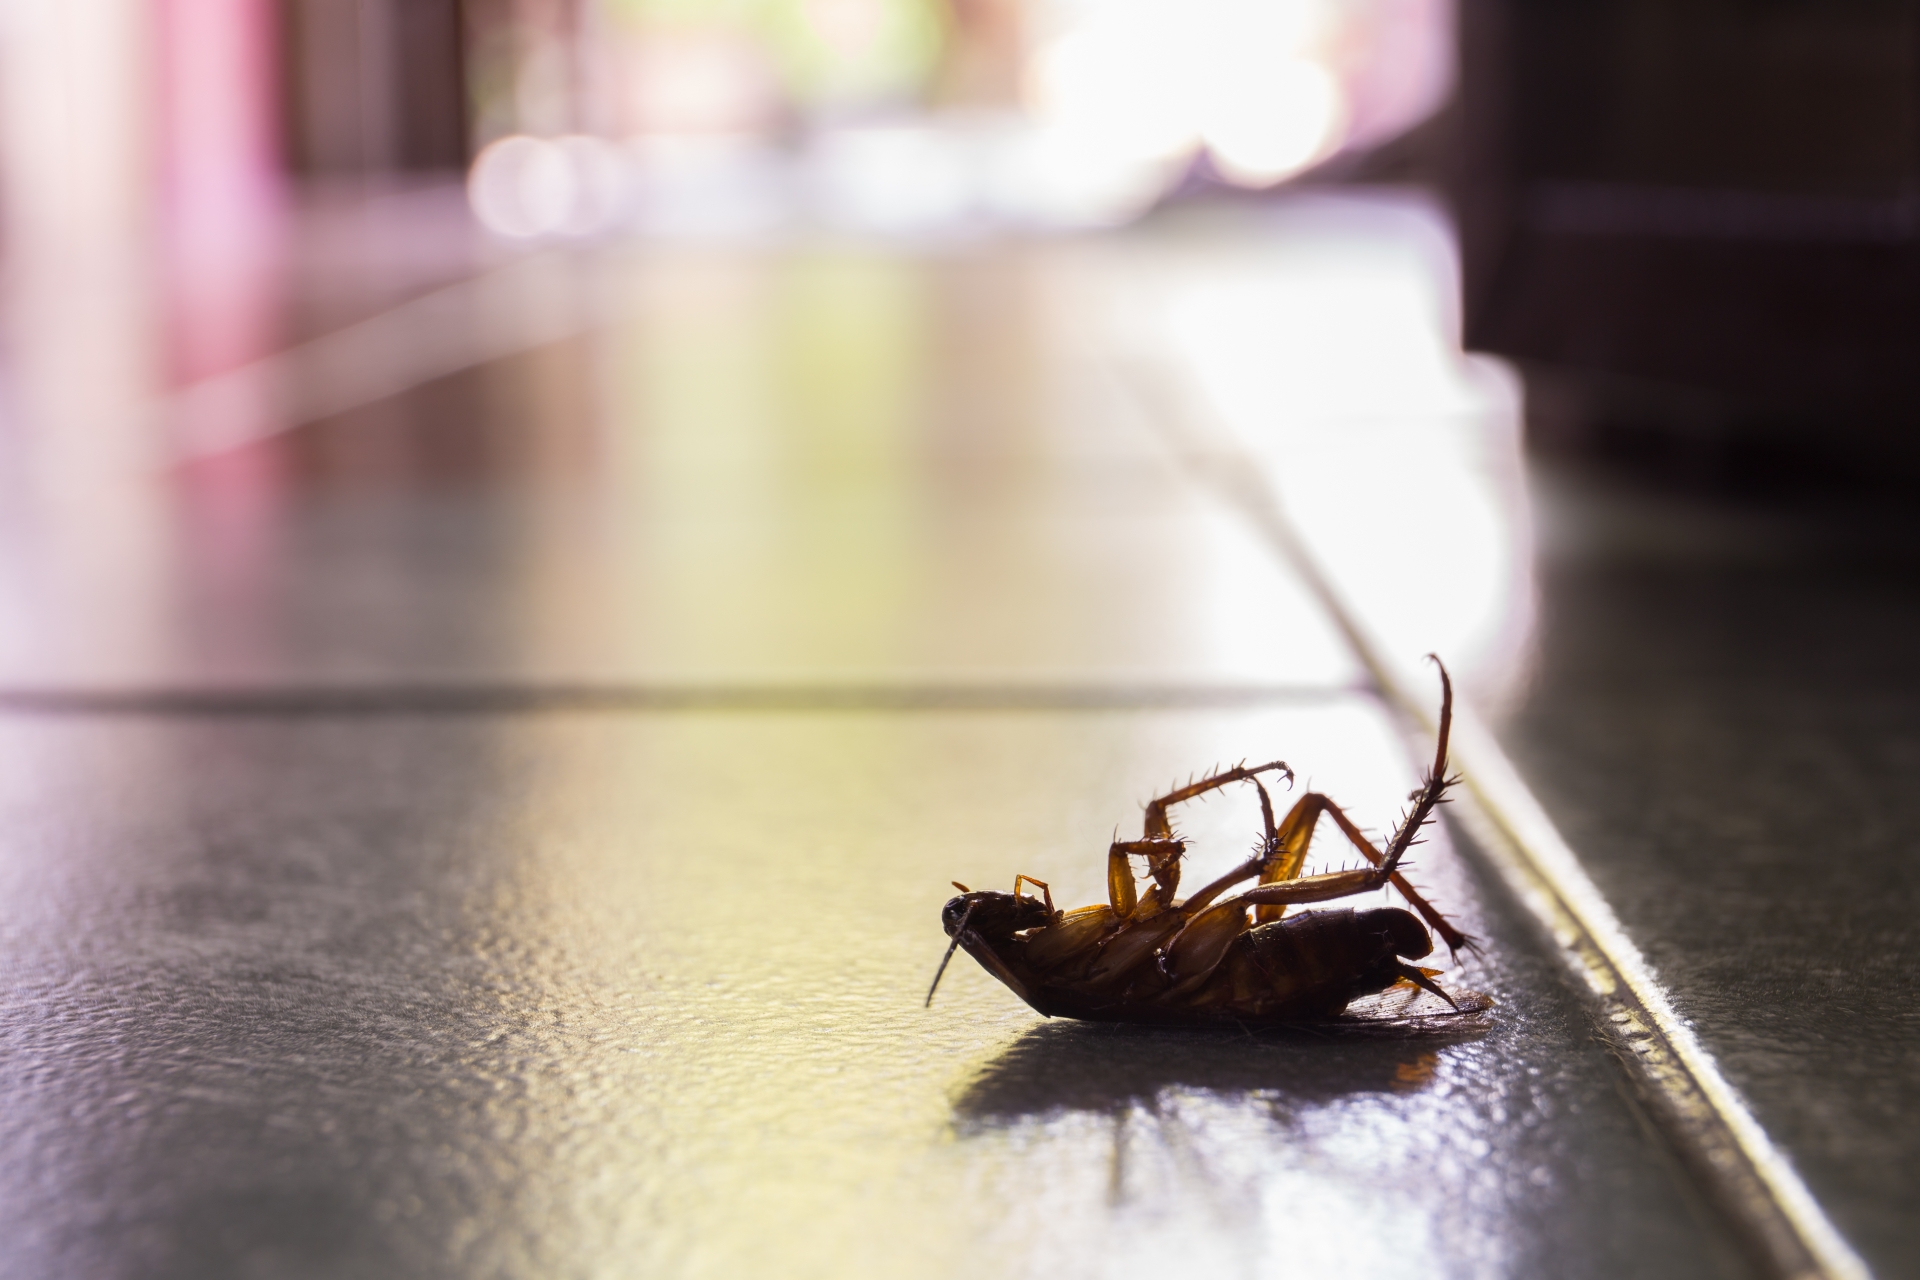 Cockroach Control, Pest Control in Totteridge, Whetstone, N20. Call Now 020 8166 9746